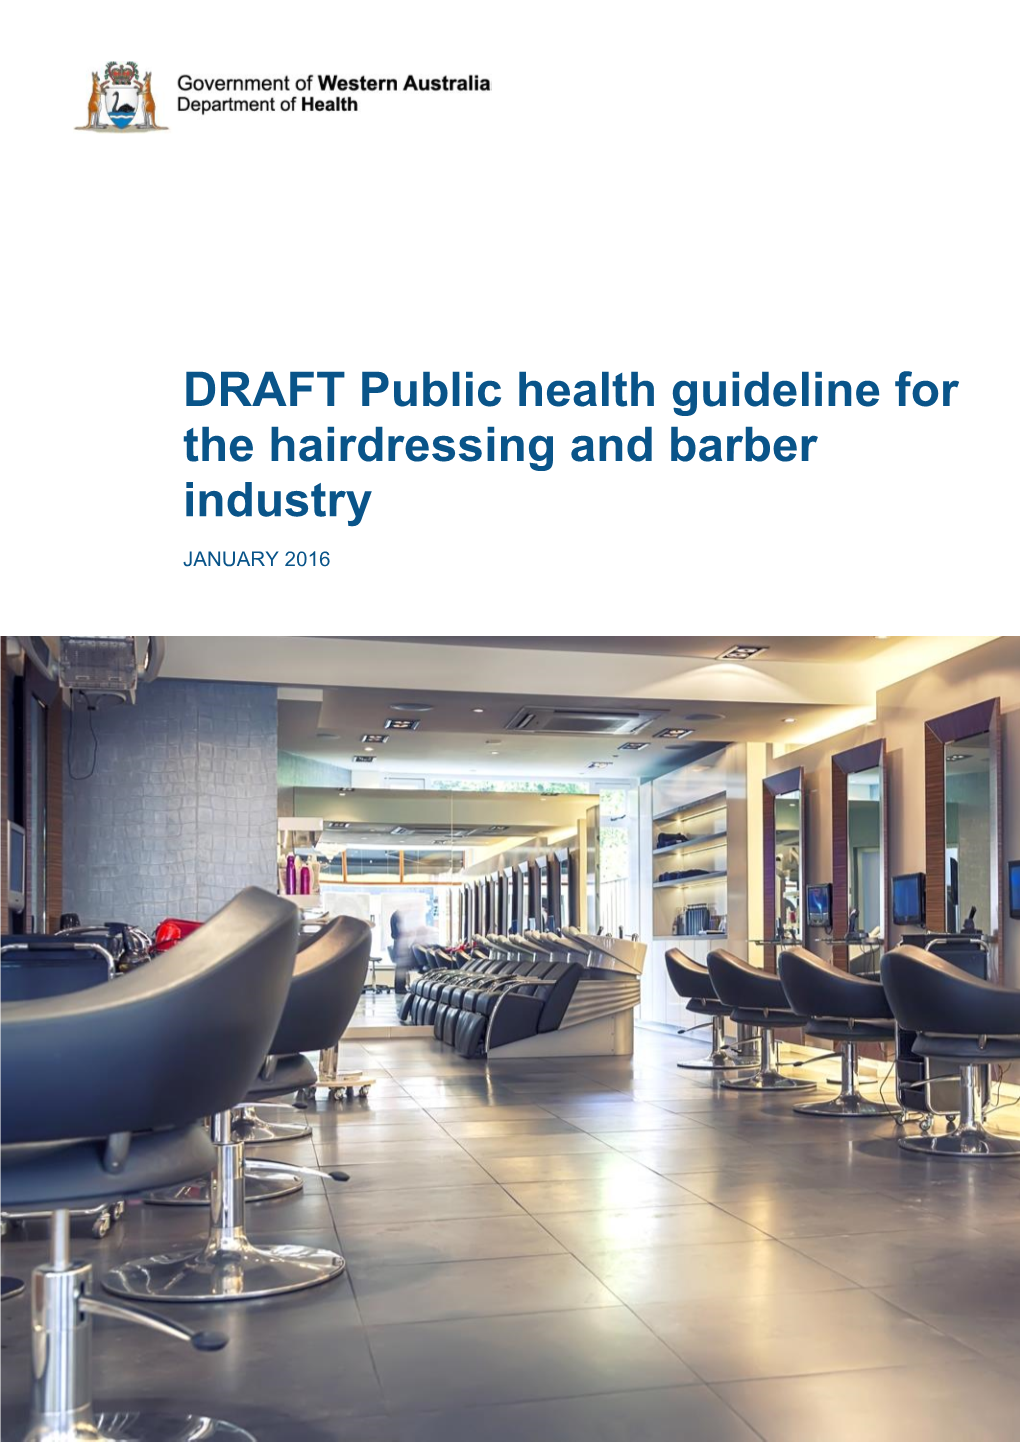 DRAFT Public Health Guideline for the Hairdressing and Barber Industry